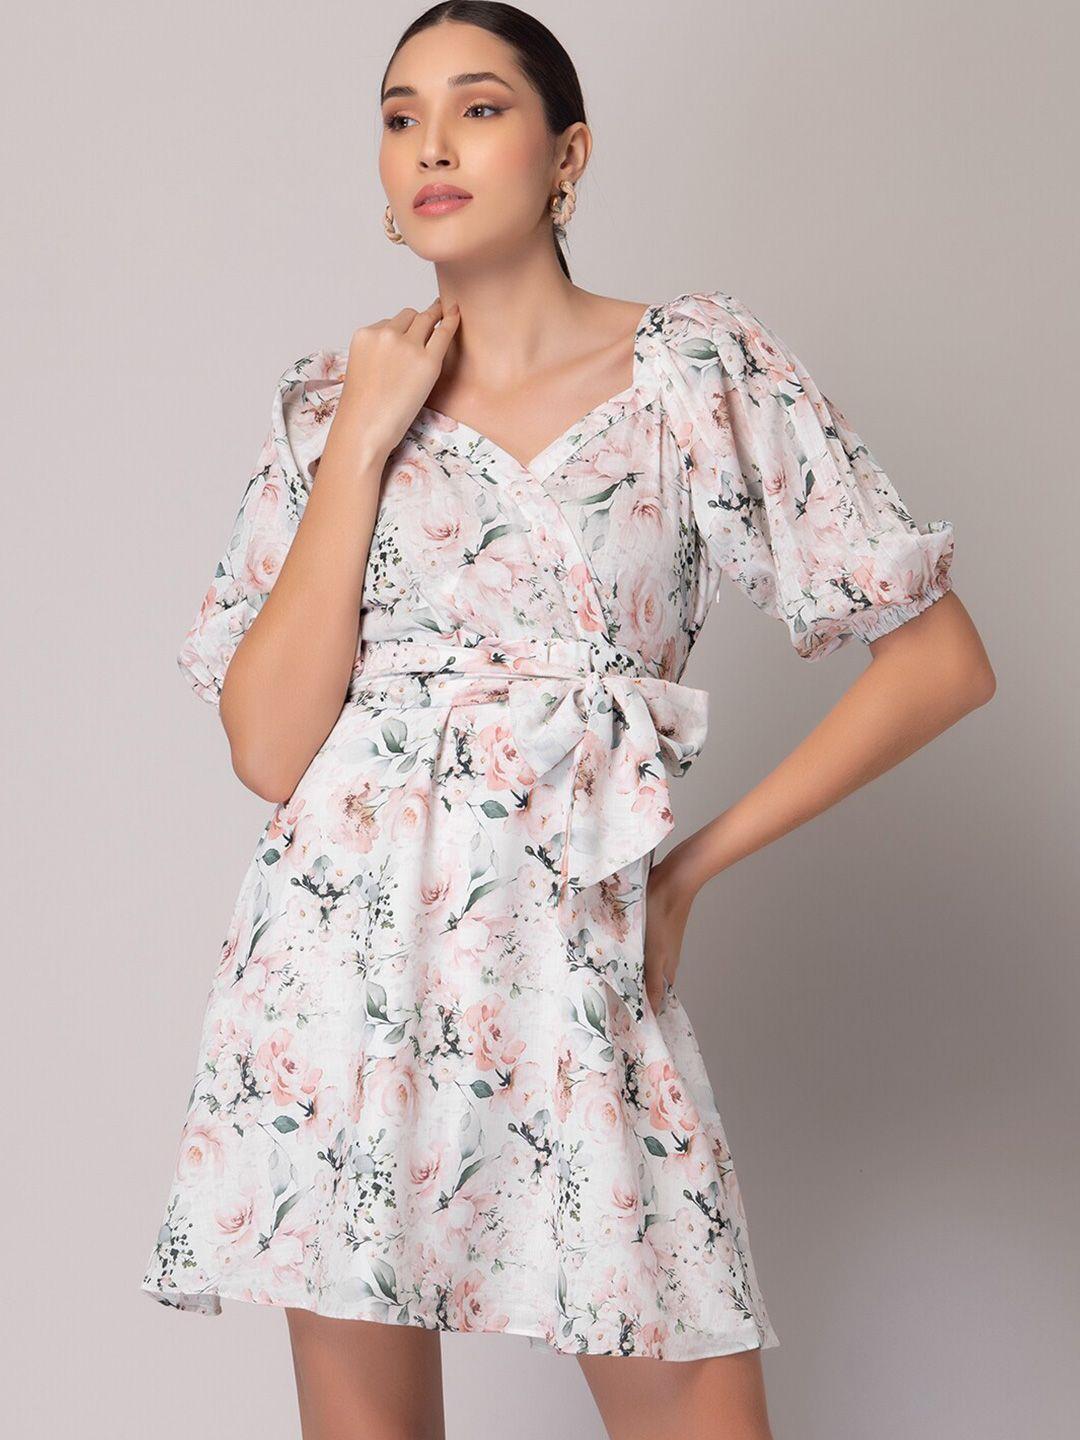 faballey white & pink floral printed puff sleeves sweetheart neck fit & flare dress